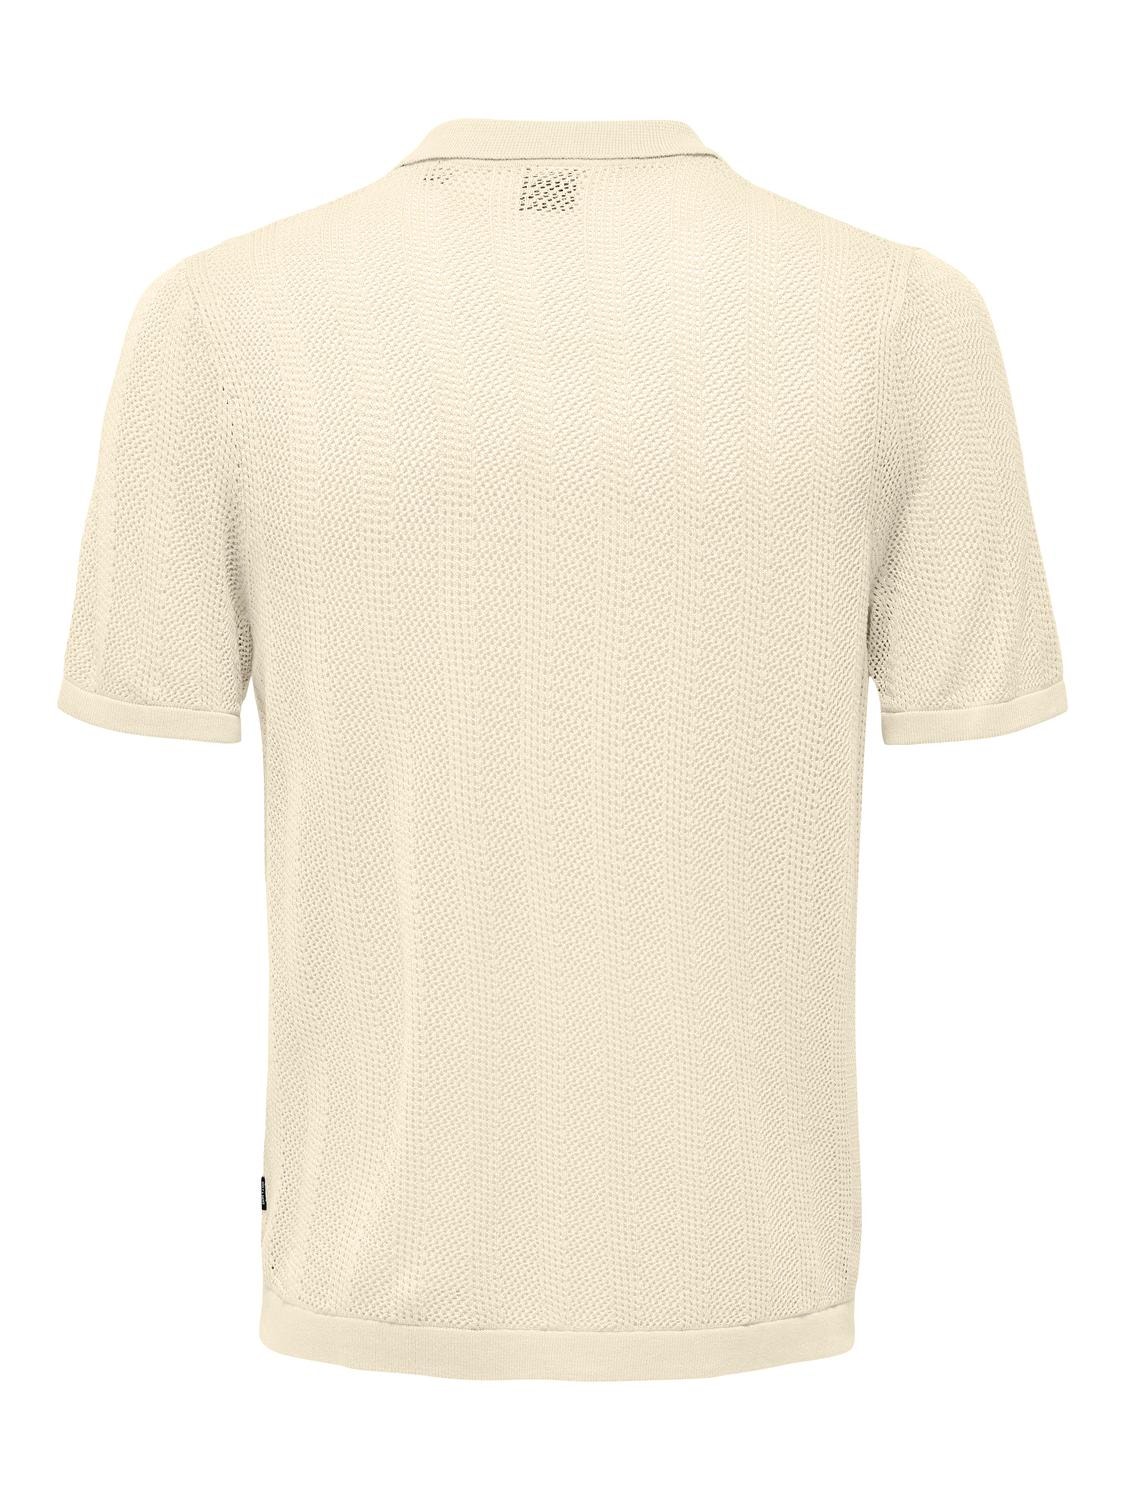 ONLY & SONS Knitted shirt with short sleeves -Antique White - 22028576